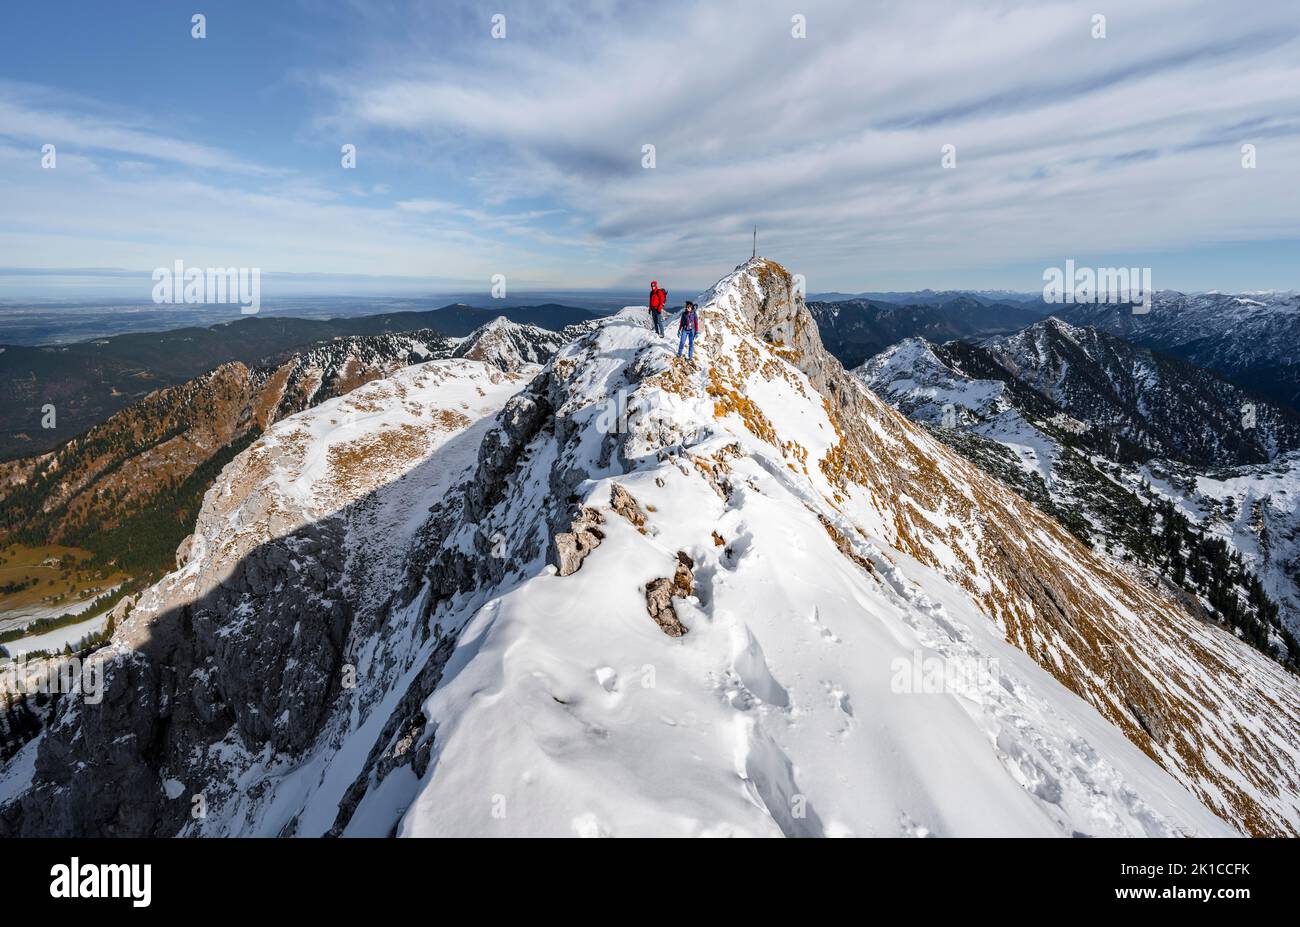 Two climbers on a narrow rocky snowy ridge, summit of the Ammergauer Hochplatte with summit cross, view of mountain panorama, hiking in autumn Stock Photo